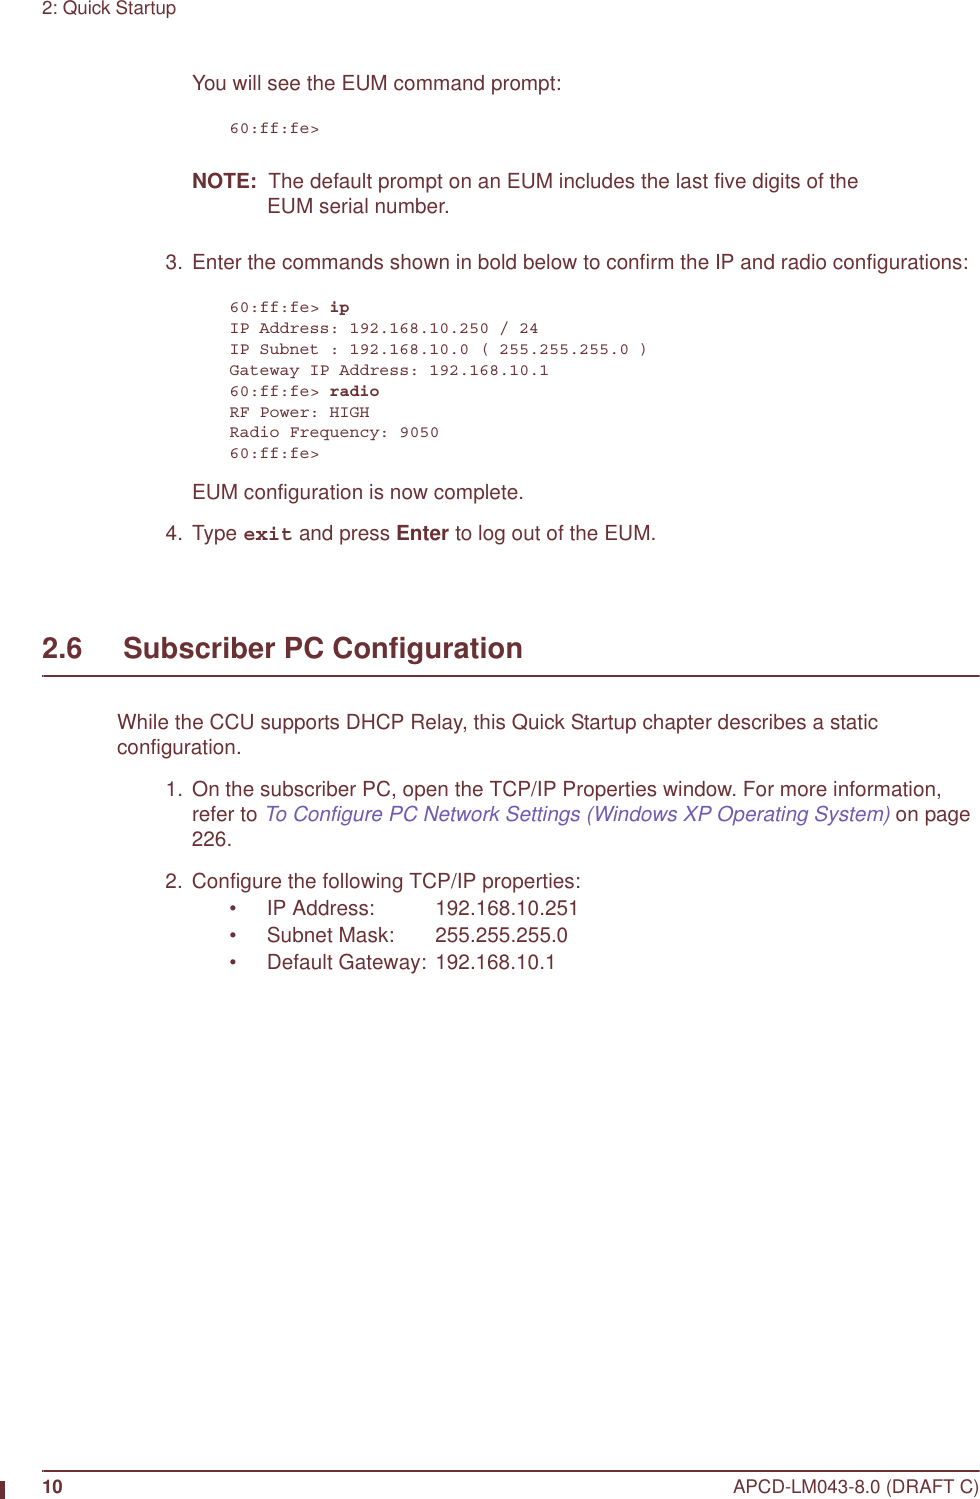 10 APCD-LM043-8.0 (DRAFT C)2: Quick StartupYou will see the EUM command prompt:60:ff:fe&gt;NOTE:  The default prompt on an EUM includes the last five digits of the EUM serial number.  3. Enter the commands shown in bold below to confirm the IP and radio configurations:60:ff:fe&gt; ipIP Address: 192.168.10.250 / 24IP Subnet : 192.168.10.0 ( 255.255.255.0 )Gateway IP Address: 192.168.10.160:ff:fe&gt; radioRF Power: HIGHRadio Frequency: 905060:ff:fe&gt;EUM configuration is now complete. 4. Type exit and press Enter to log out of the EUM.2.6     Subscriber PC ConfigurationWhile the CCU supports DHCP Relay, this Quick Startup chapter describes a static configuration.  1.  On the subscriber PC, open the TCP/IP Properties window. For more information, refer to To Configure PC Network Settings (Windows XP Operating System) on page 226.  2. Configure the following TCP/IP properties:• IP Address: 192.168.10.251• Subnet Mask: 255.255.255.0• Default Gateway: 192.168.10.1